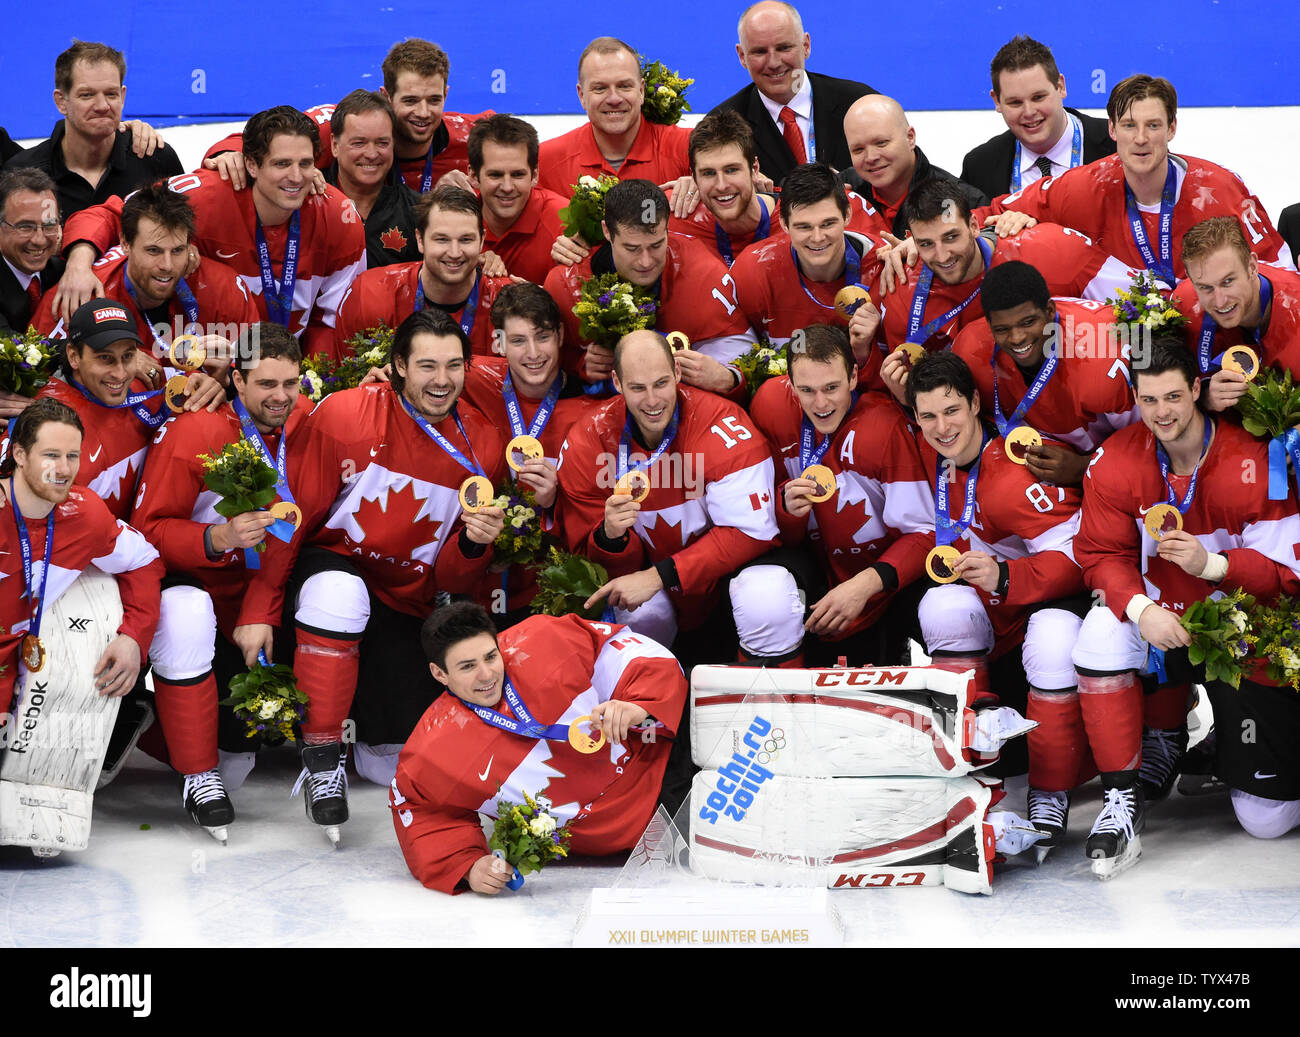 Members of the Canadian olympic hockey team pose for a photo with their  gold medals after defeating Sweden at the Sochi 2014 Winter Olympics on  February 23, 2014 in Sochi, Russia. Canada